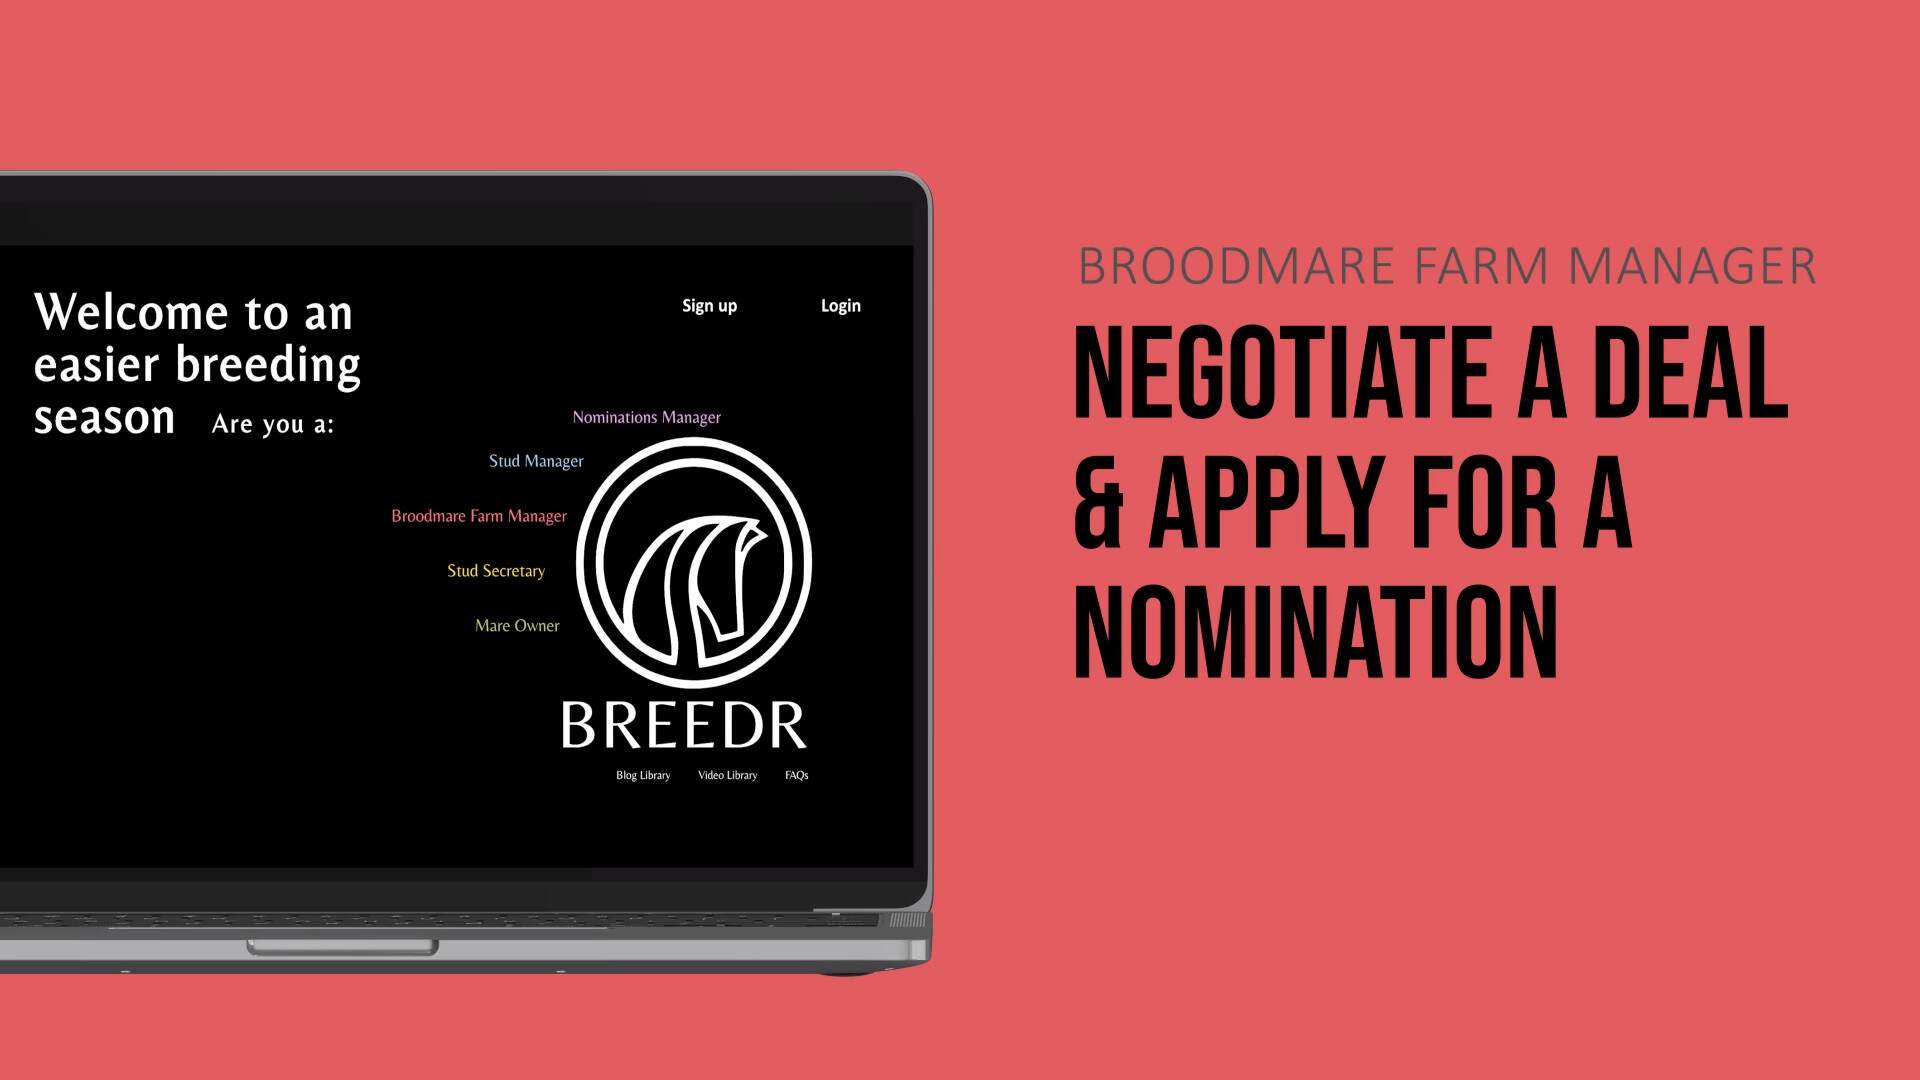 Broodmare farm manager Negotiate a deal apply for a nomination